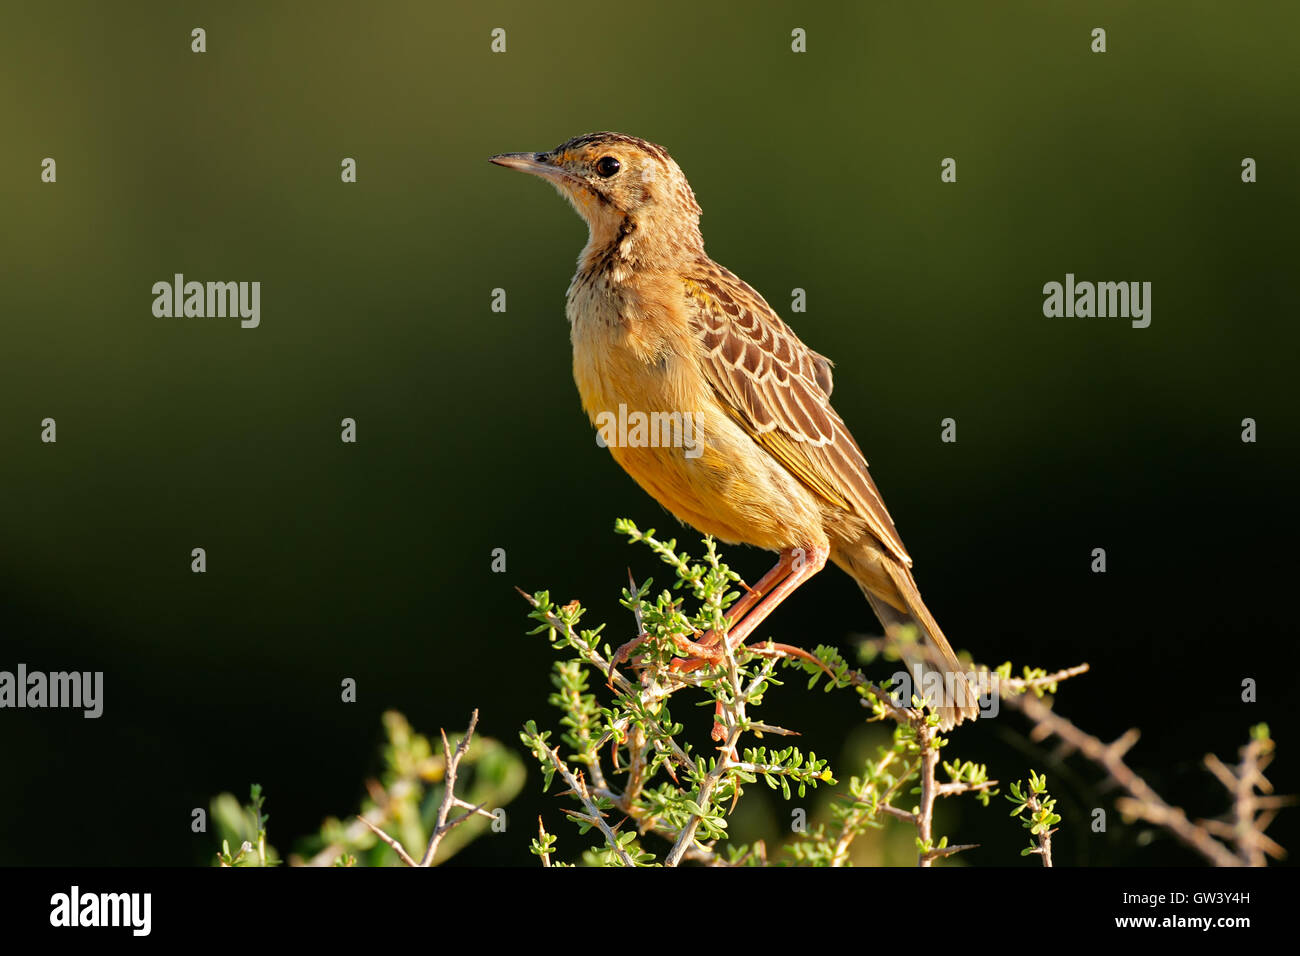 An orange-throated longclaw (Macronyx capensis) sitting on a branch, South Africa Stock Photo